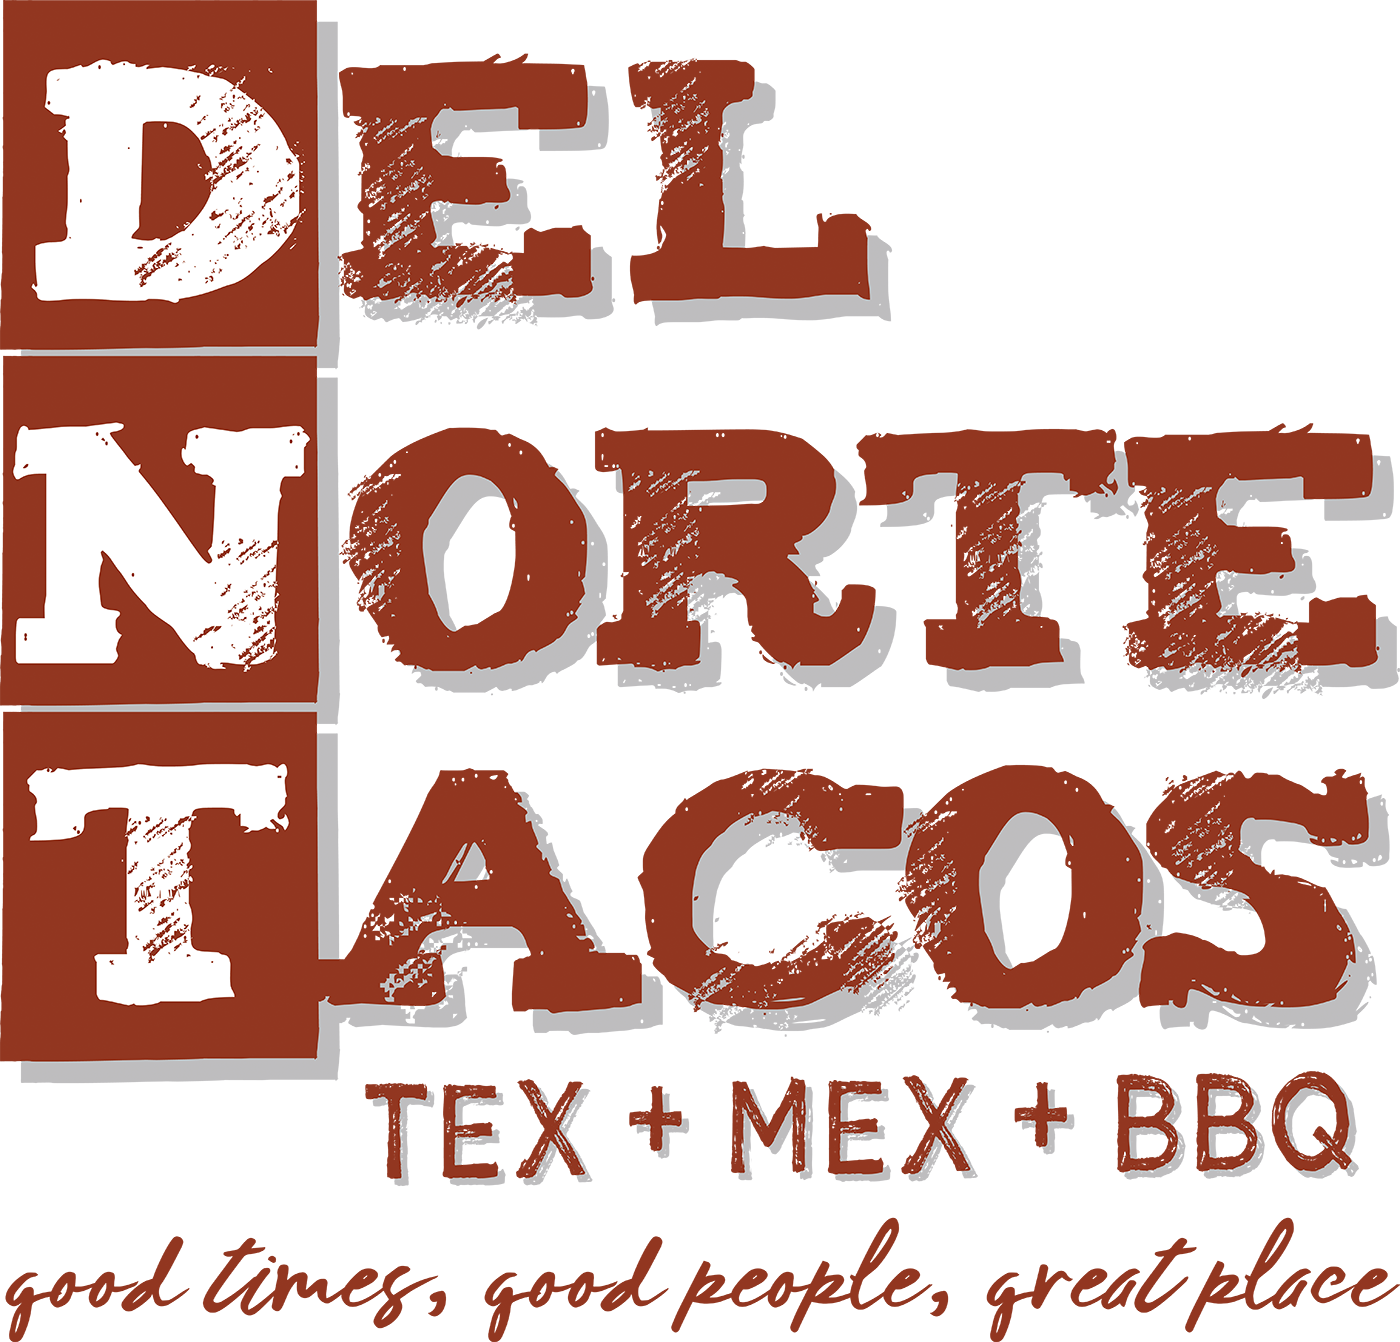 Del norte tacos tex mex bbq good times good people great place